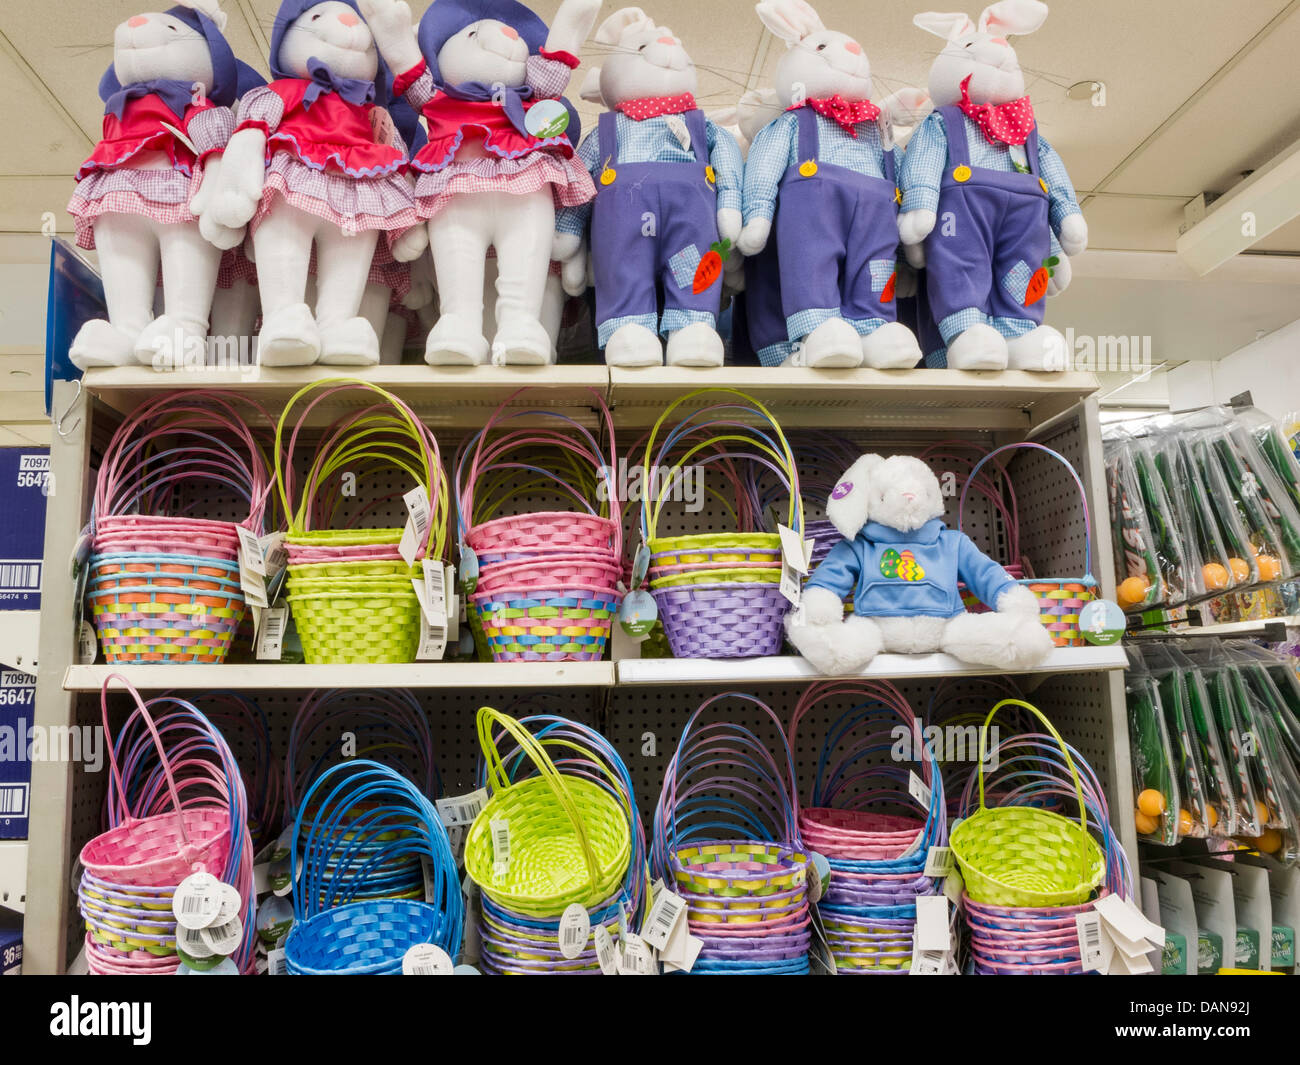 Traditional Easter Decorations Display, Kmart, NYC Stock Photo - Alamy